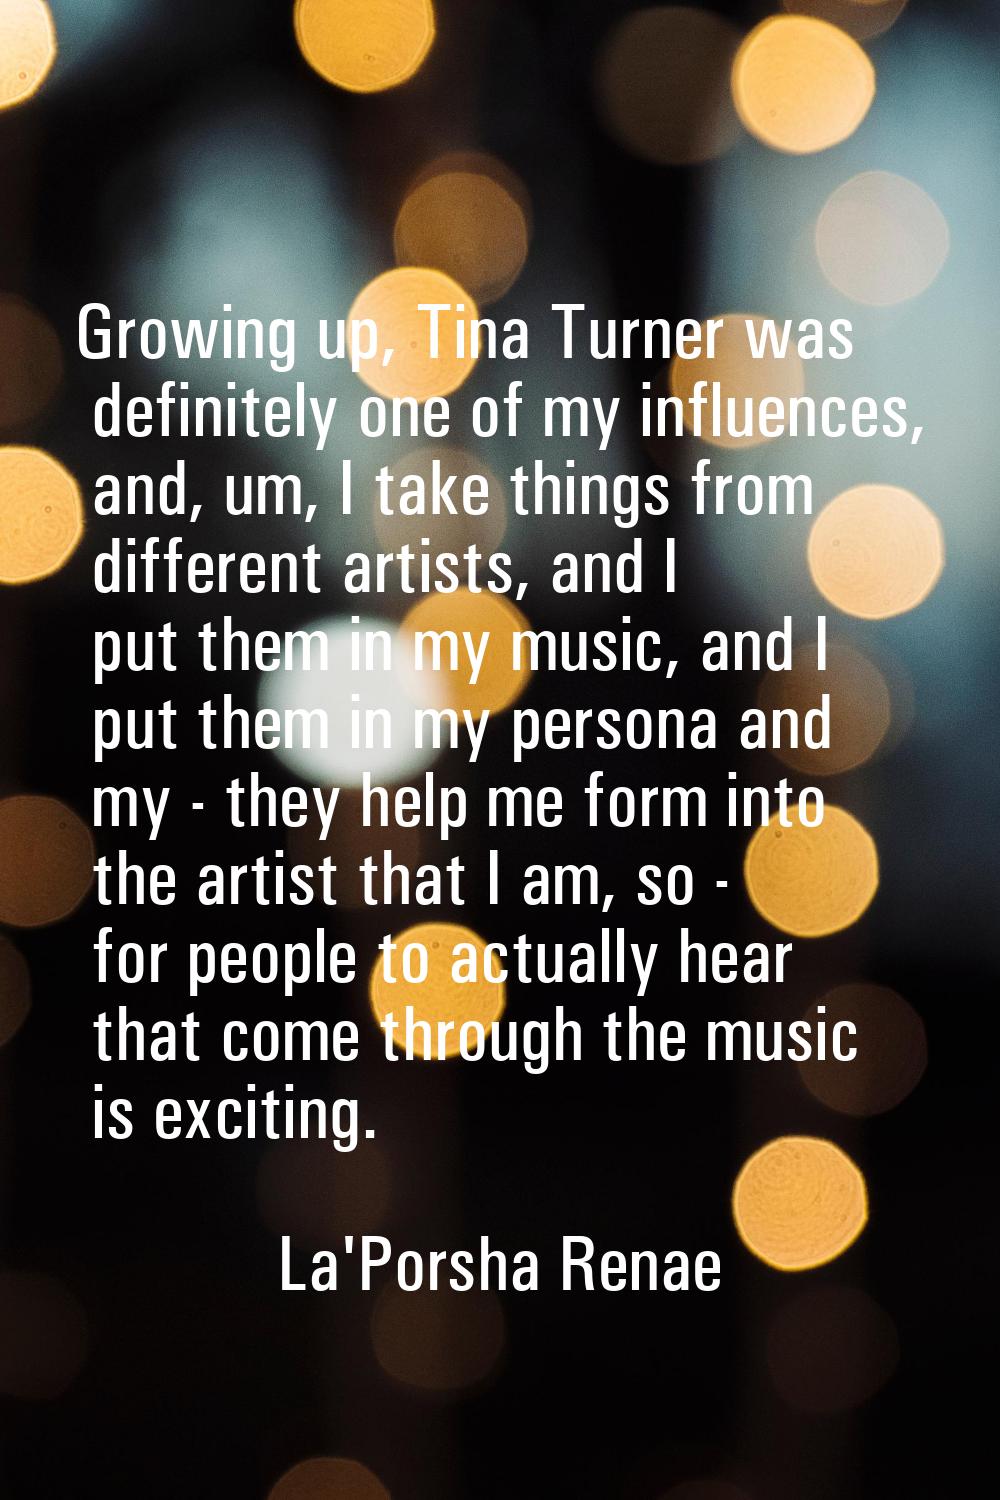 Growing up, Tina Turner was definitely one of my influences, and, um, I take things from different 